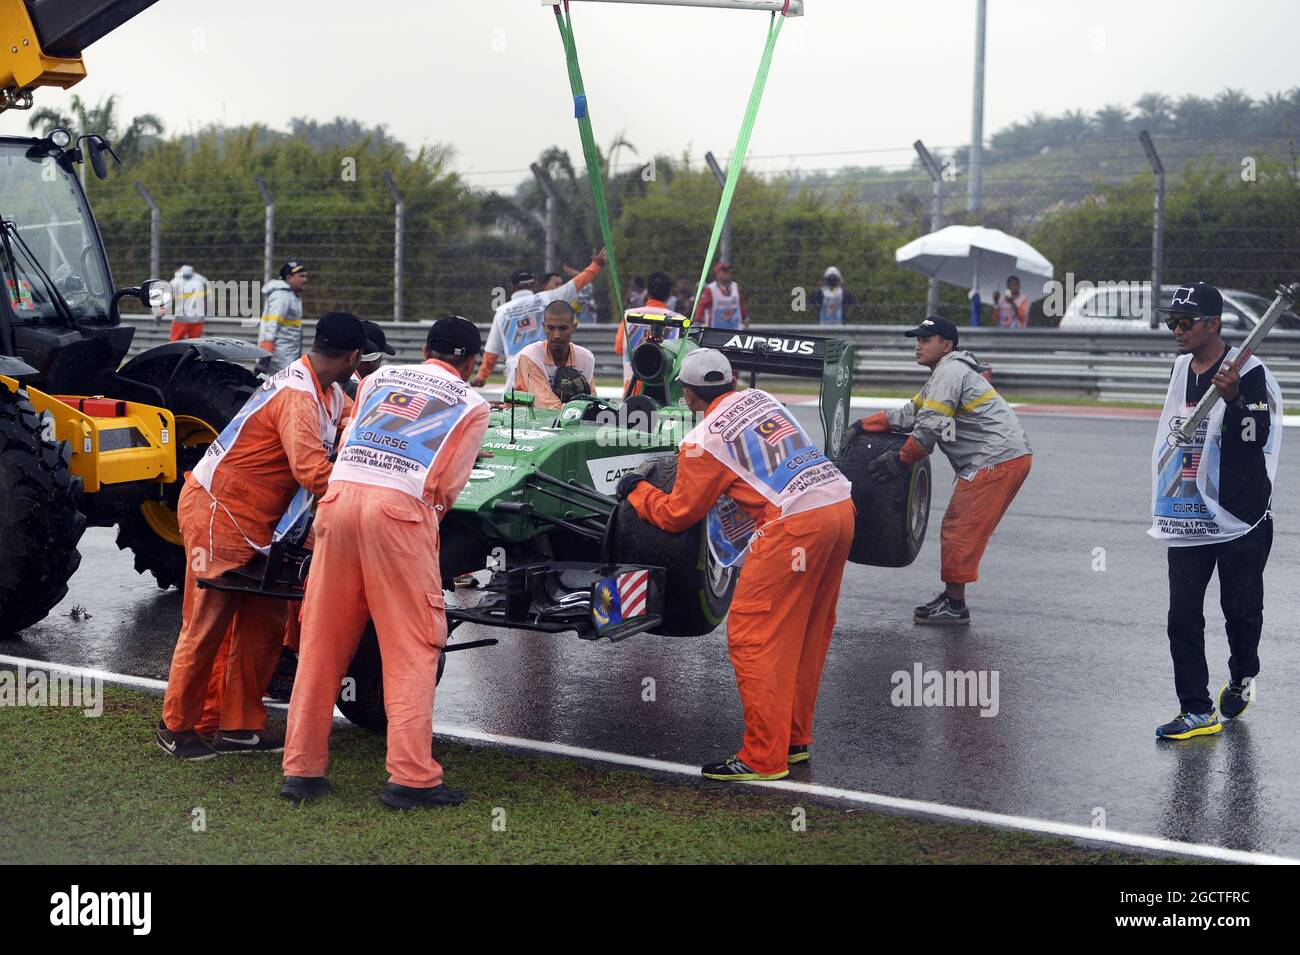 The Caterham CT05 of Marcus Ericsson (SWE) Caterham is recovered by marshalls after he crashed in qualifying. Malaysian Grand Prix, Saturday 29th March 2014. Sepang, Kuala Lumpur, Malaysia. Stock Photo